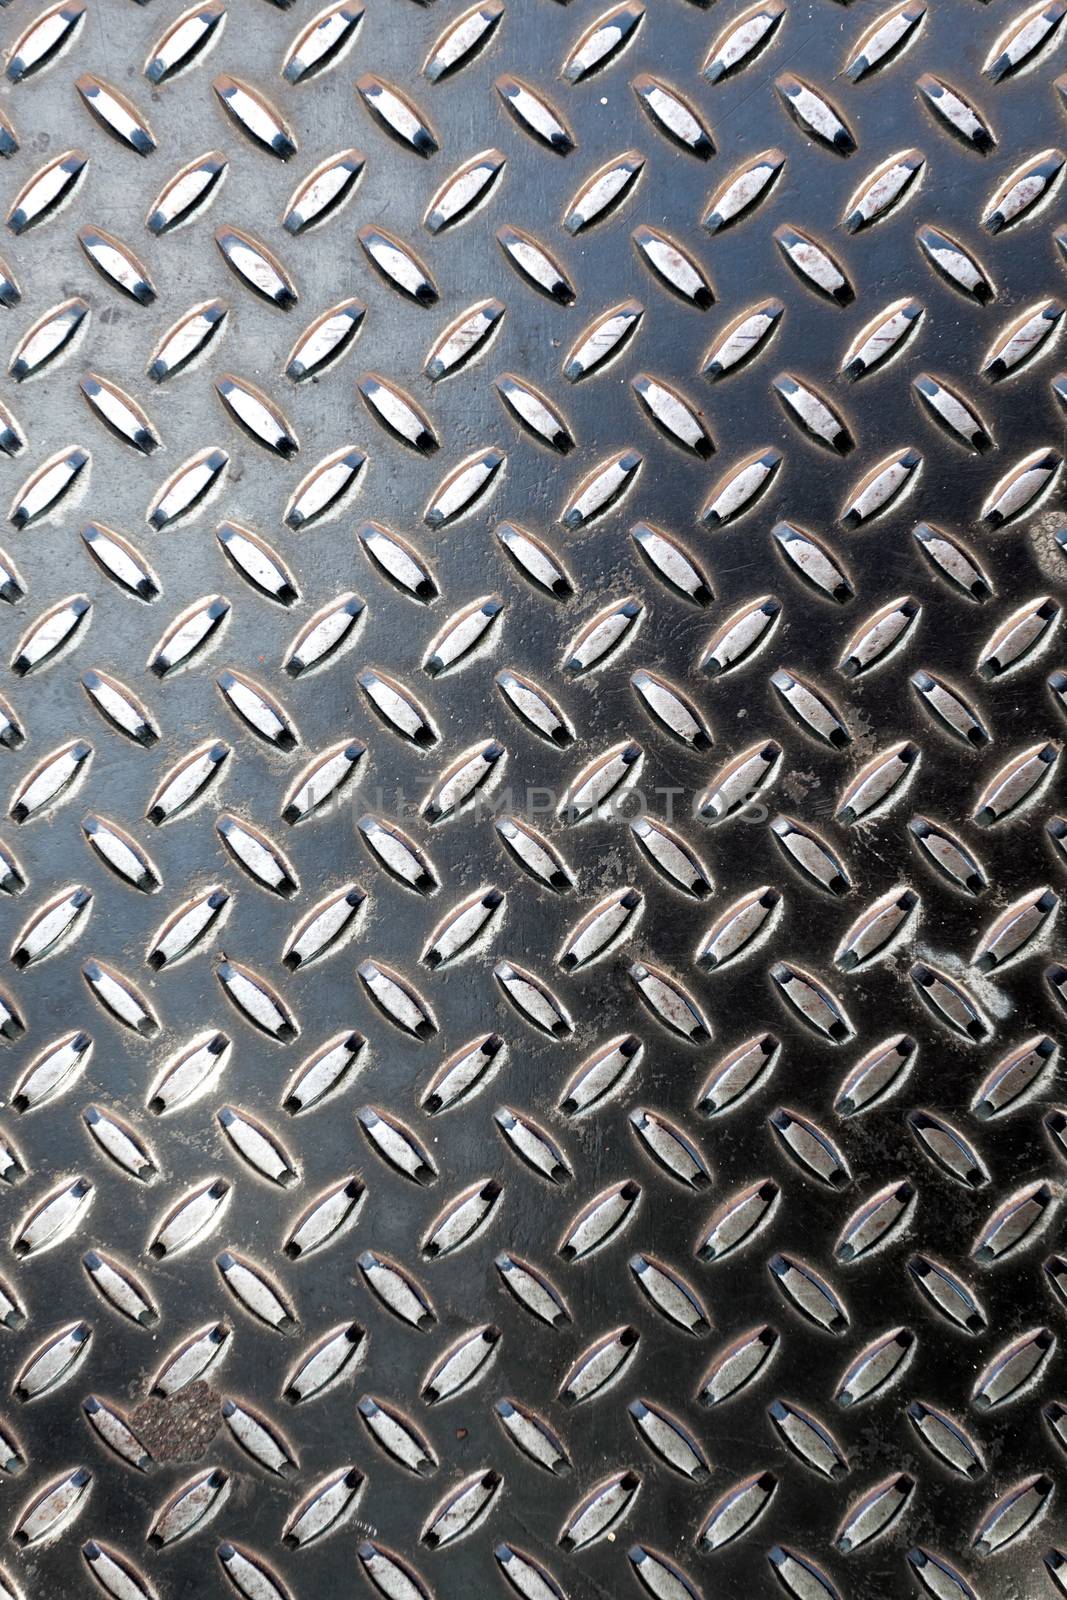 Closeup of real diamond plate metal material. This is the real thing and not an illustration.